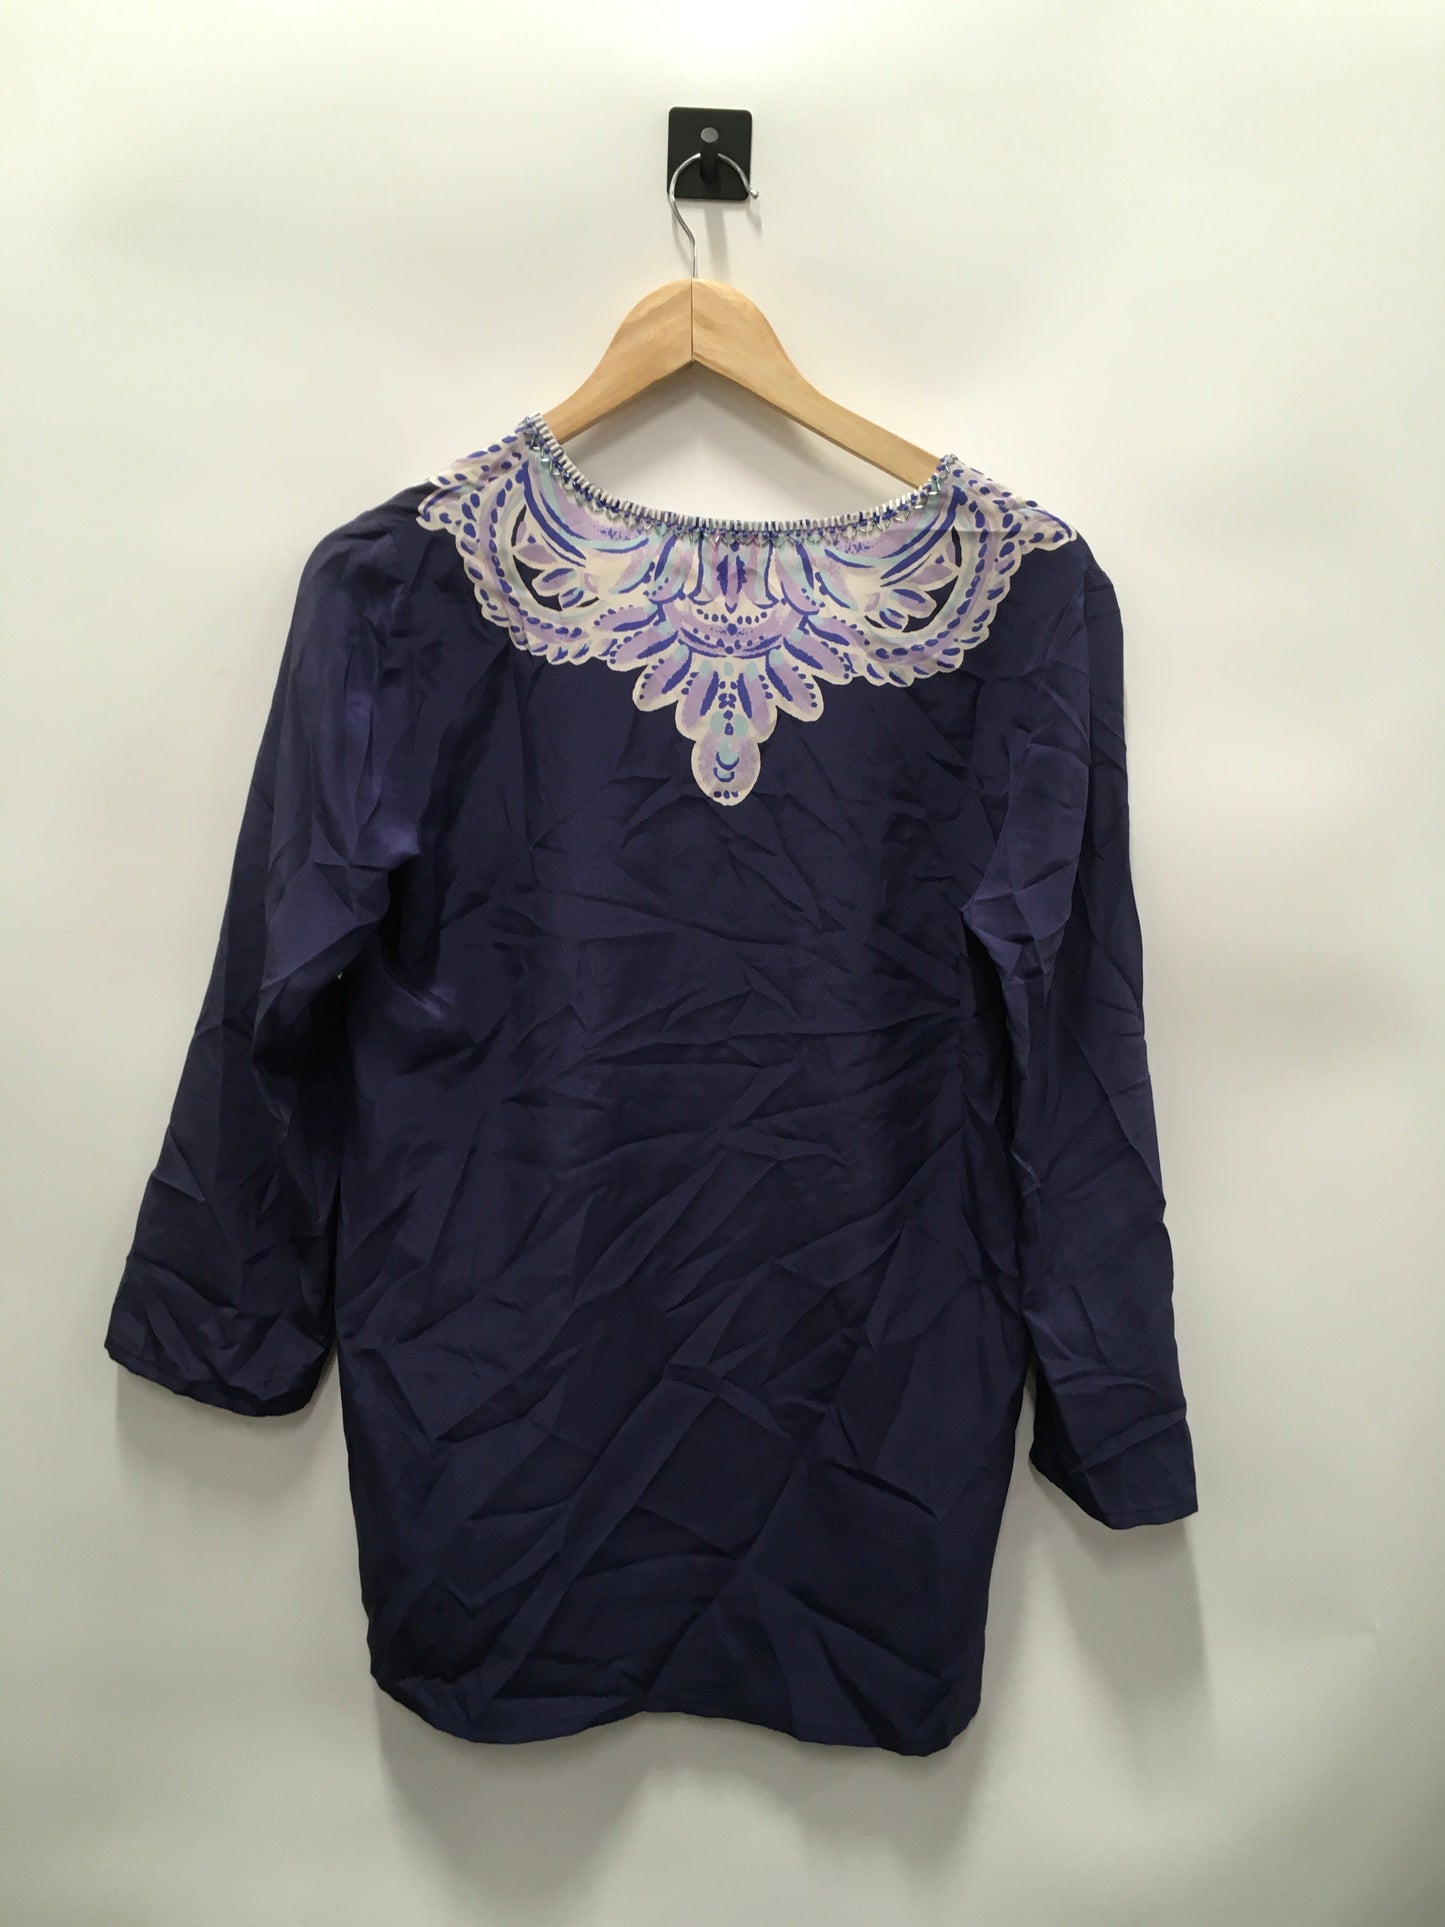 Navy Blouse Long Sleeve Lilly Pulitzer, Size S